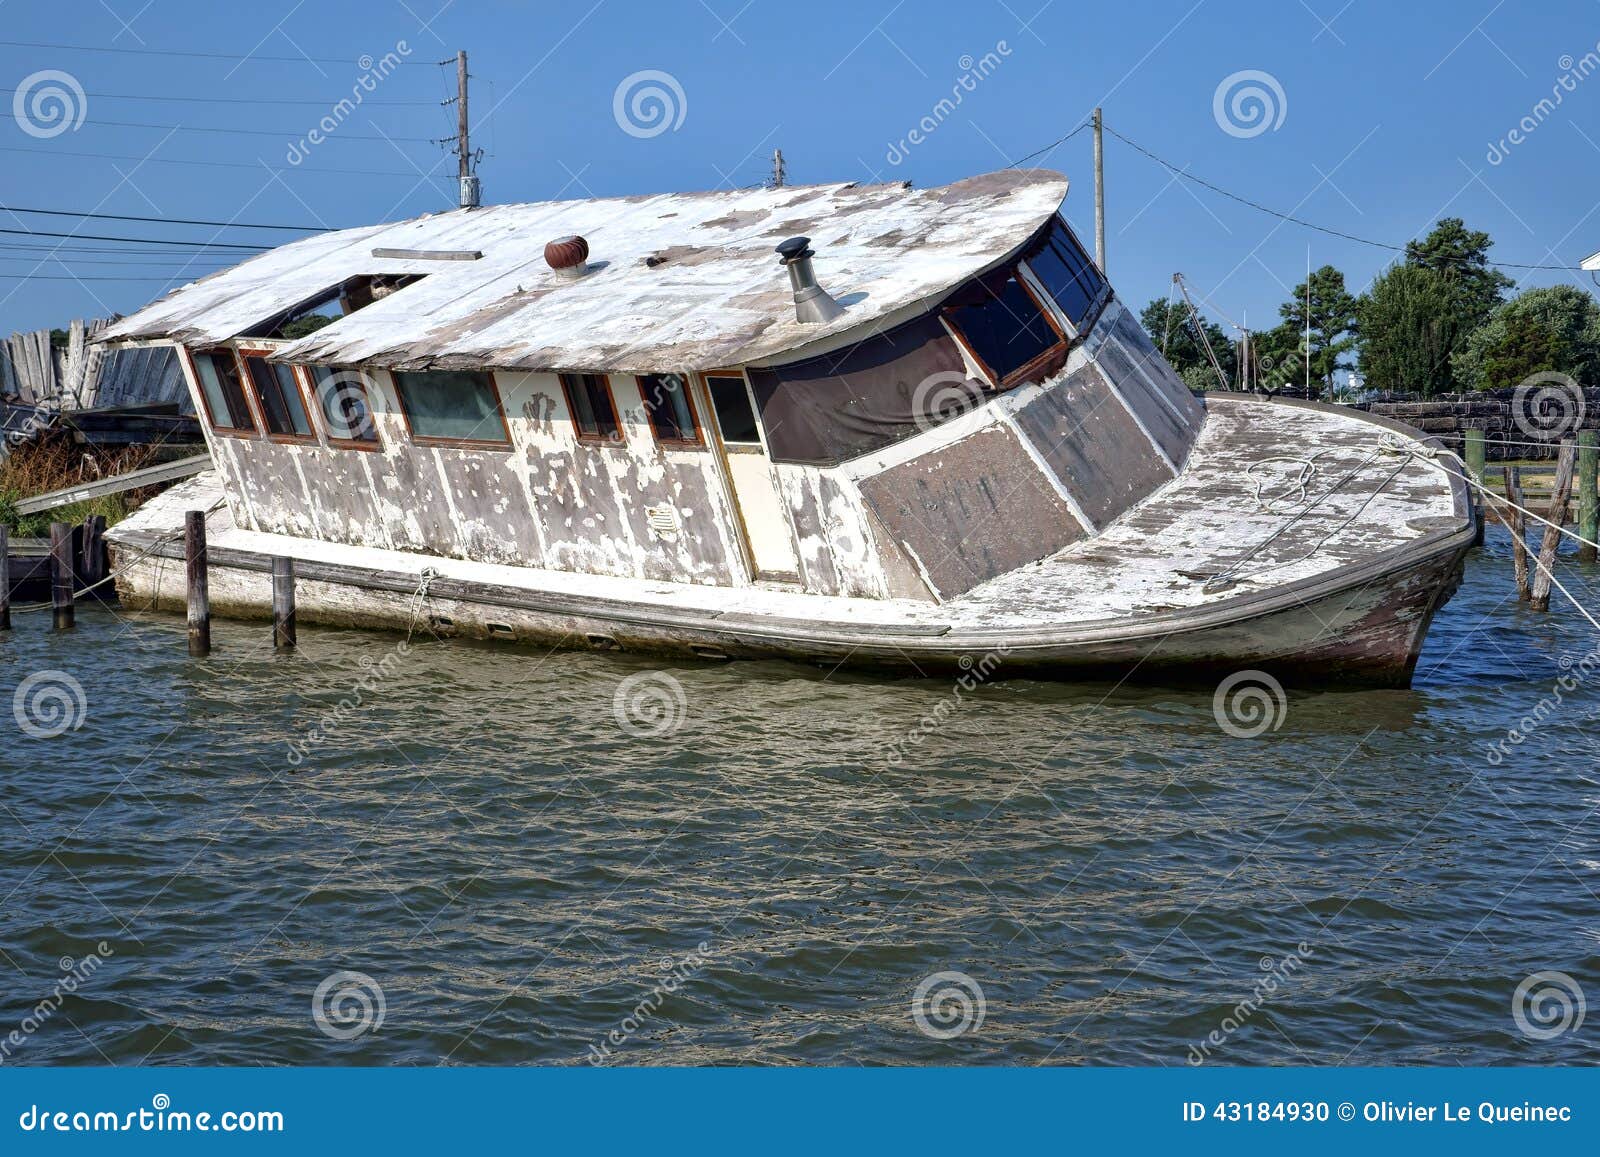 Abandoned Derelict Boat Sinking After Hurricane Stock Photo - Image 